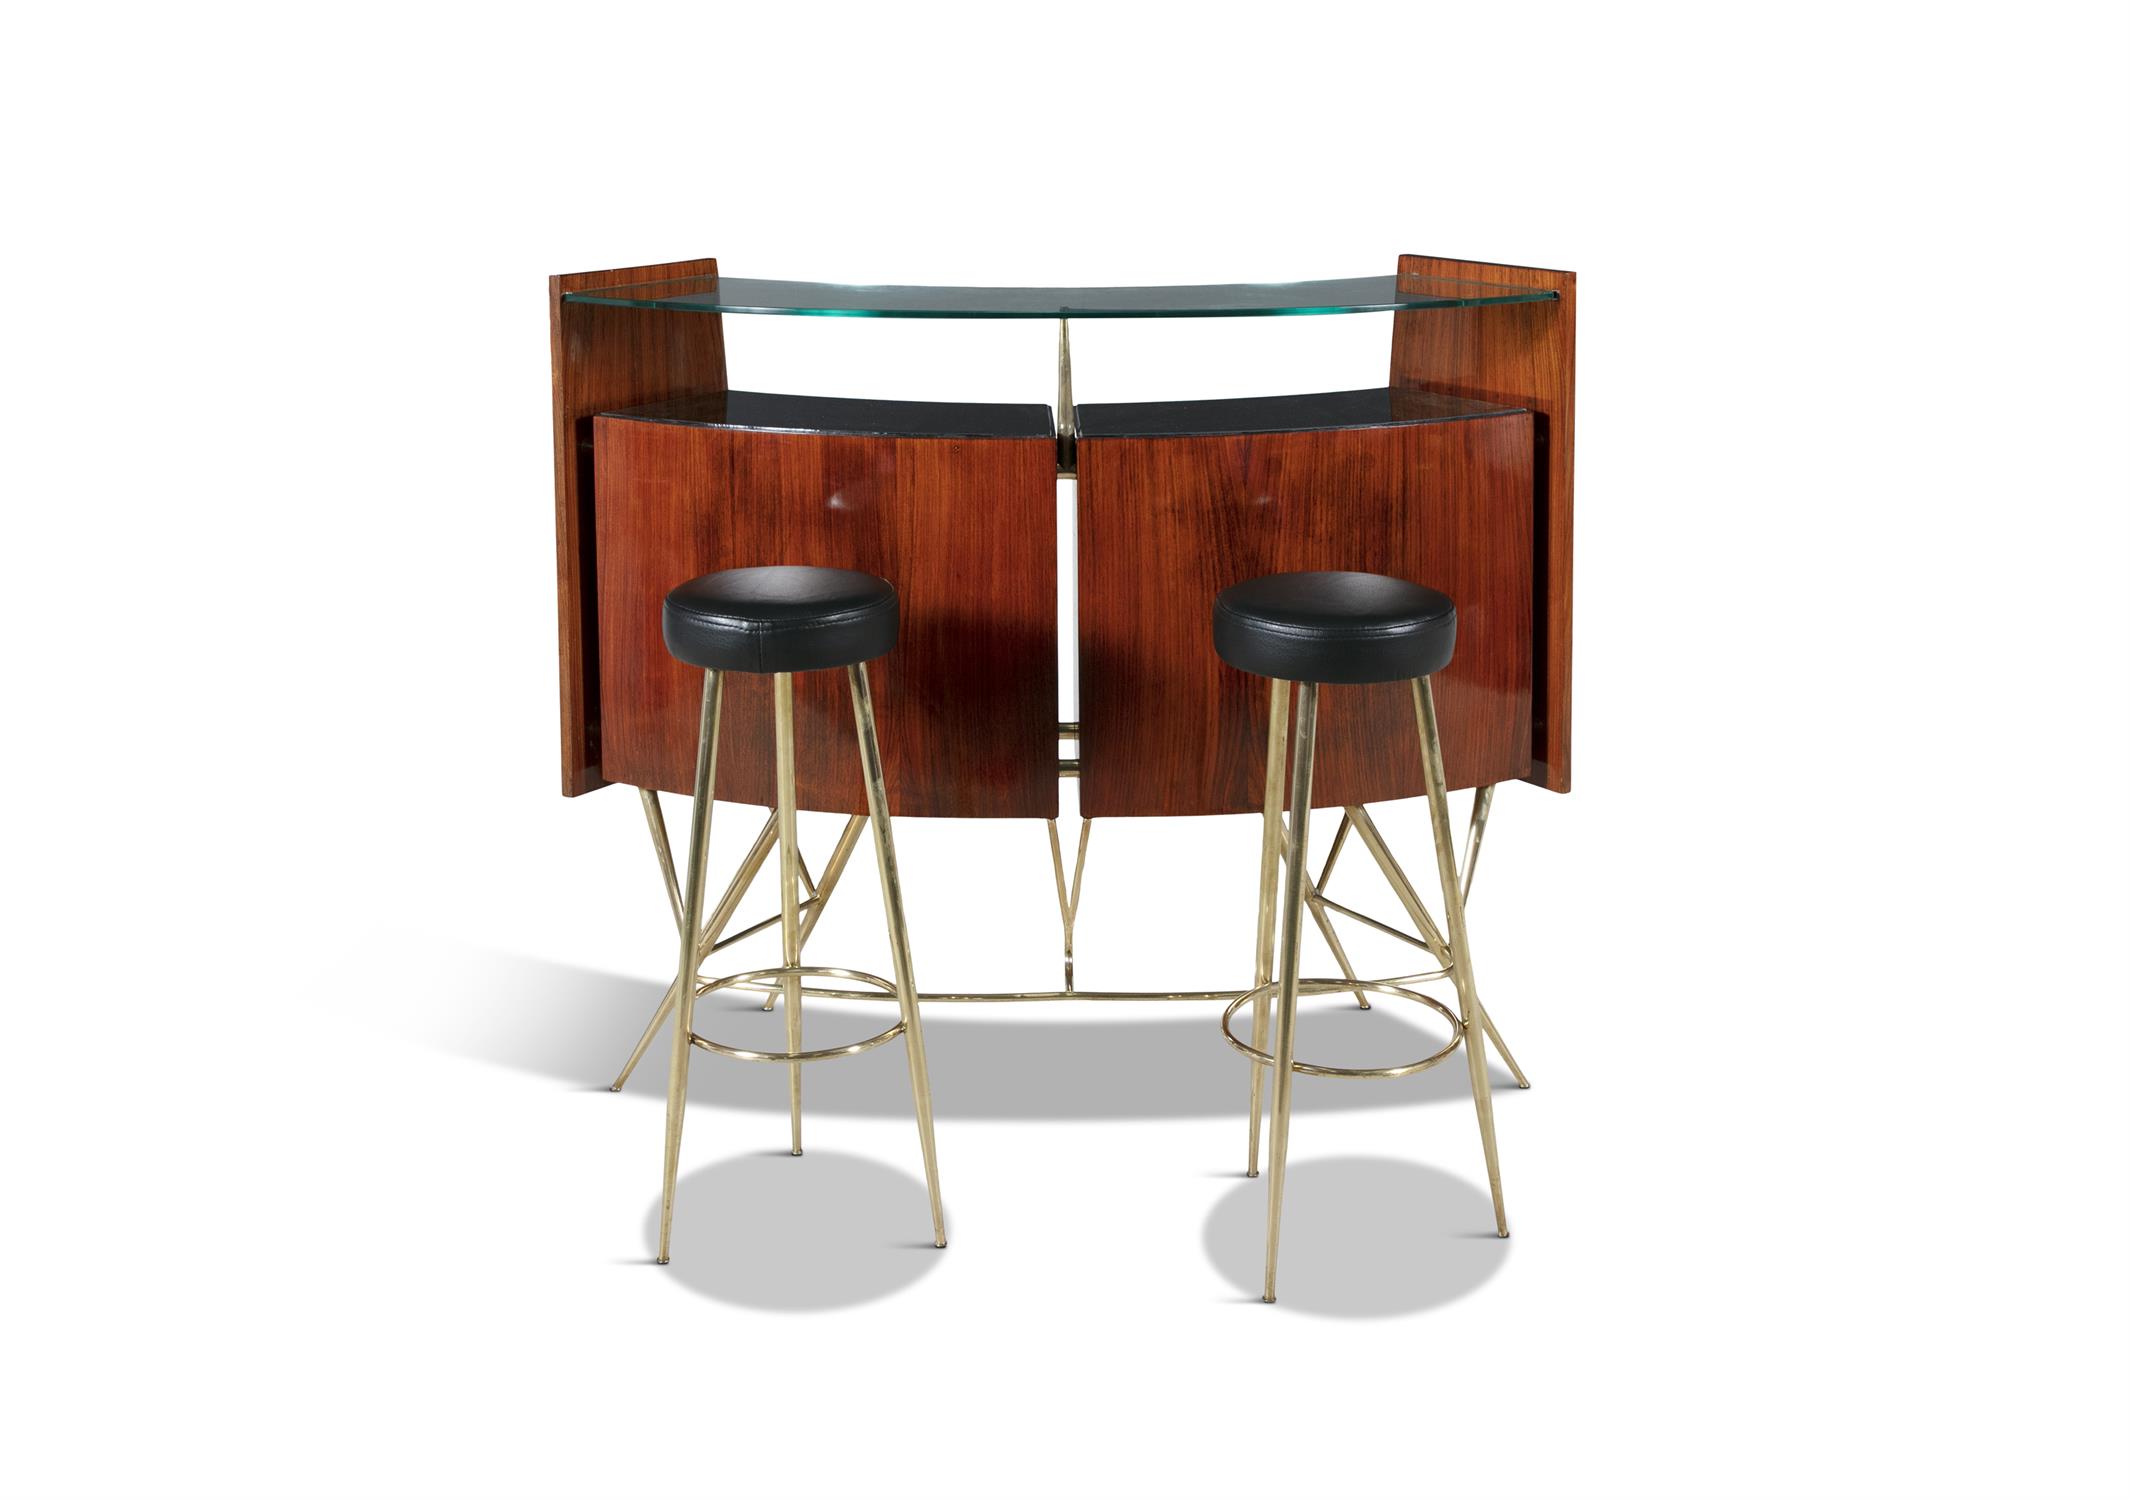 BAR SET A rosewood and brass bar set, complete with two stools and a curved glass top, Italy c. - Image 3 of 14